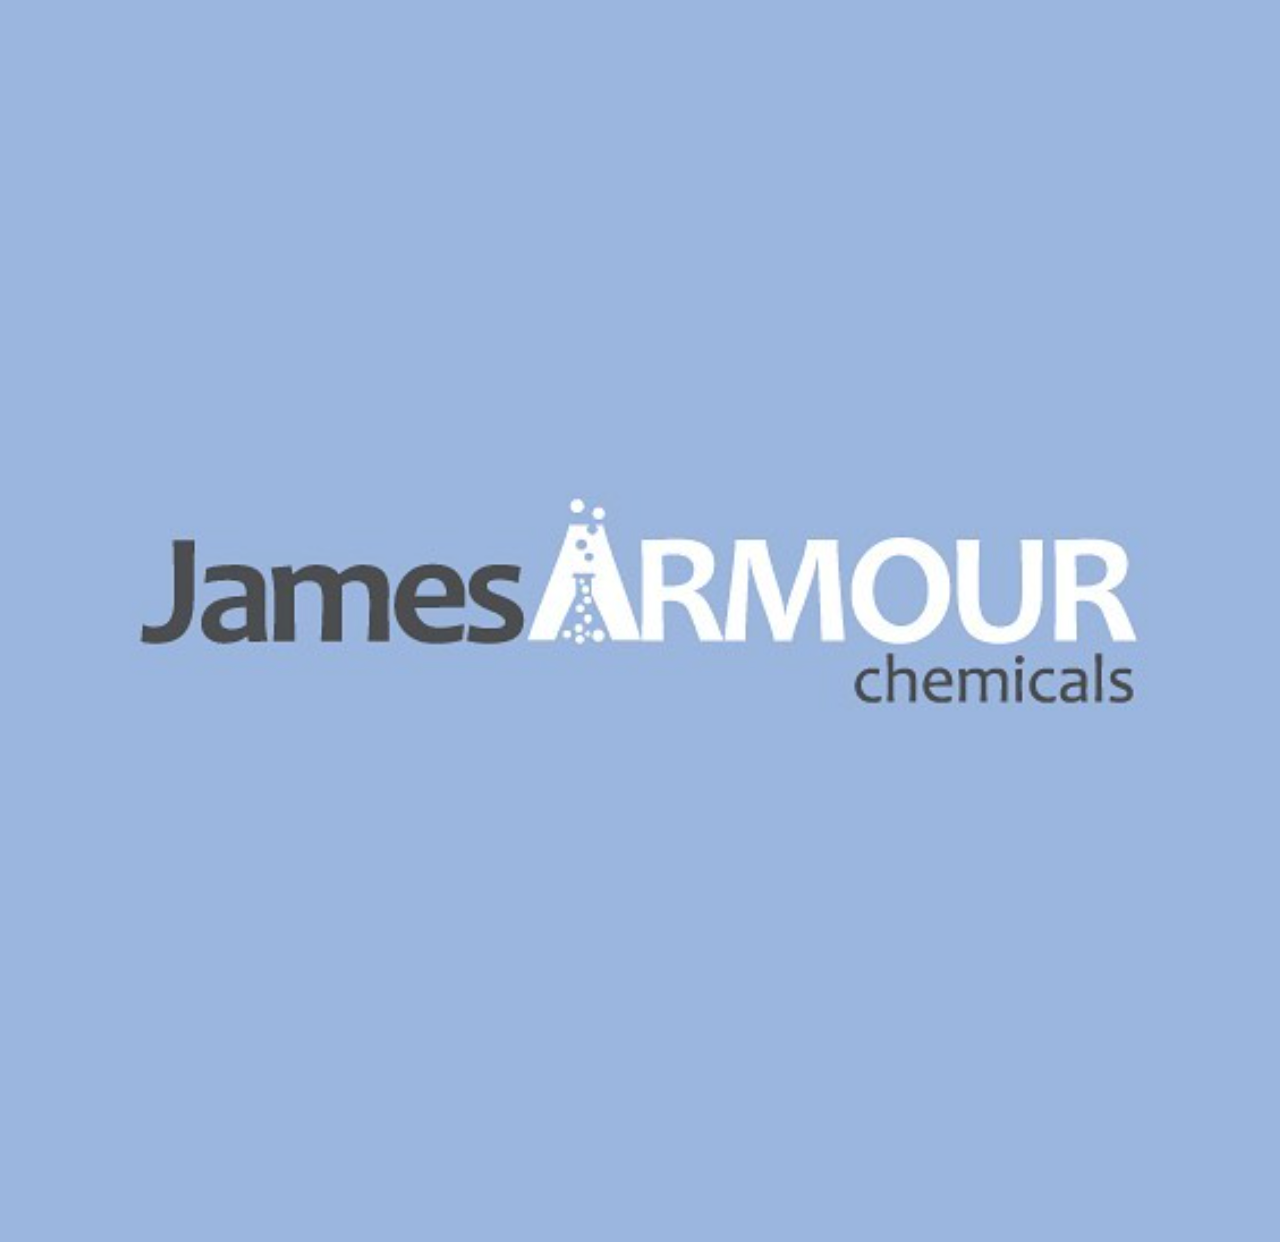 James Armour Chemicals